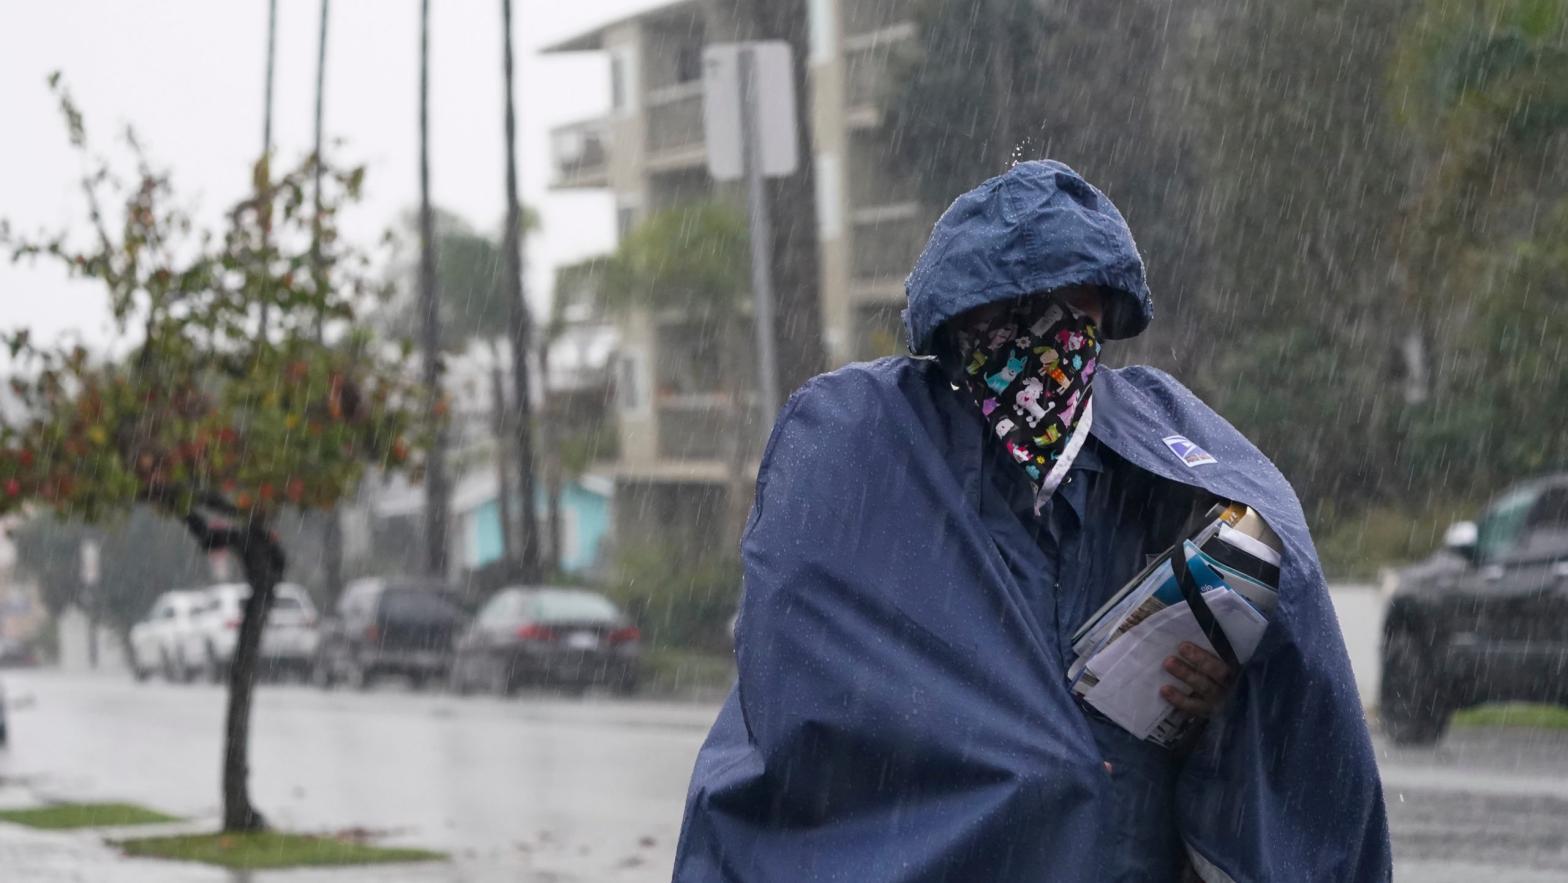 A Postal Service worker delivers mail in the rain in Long Beach, California. (Photo: Ashley Landis, AP)